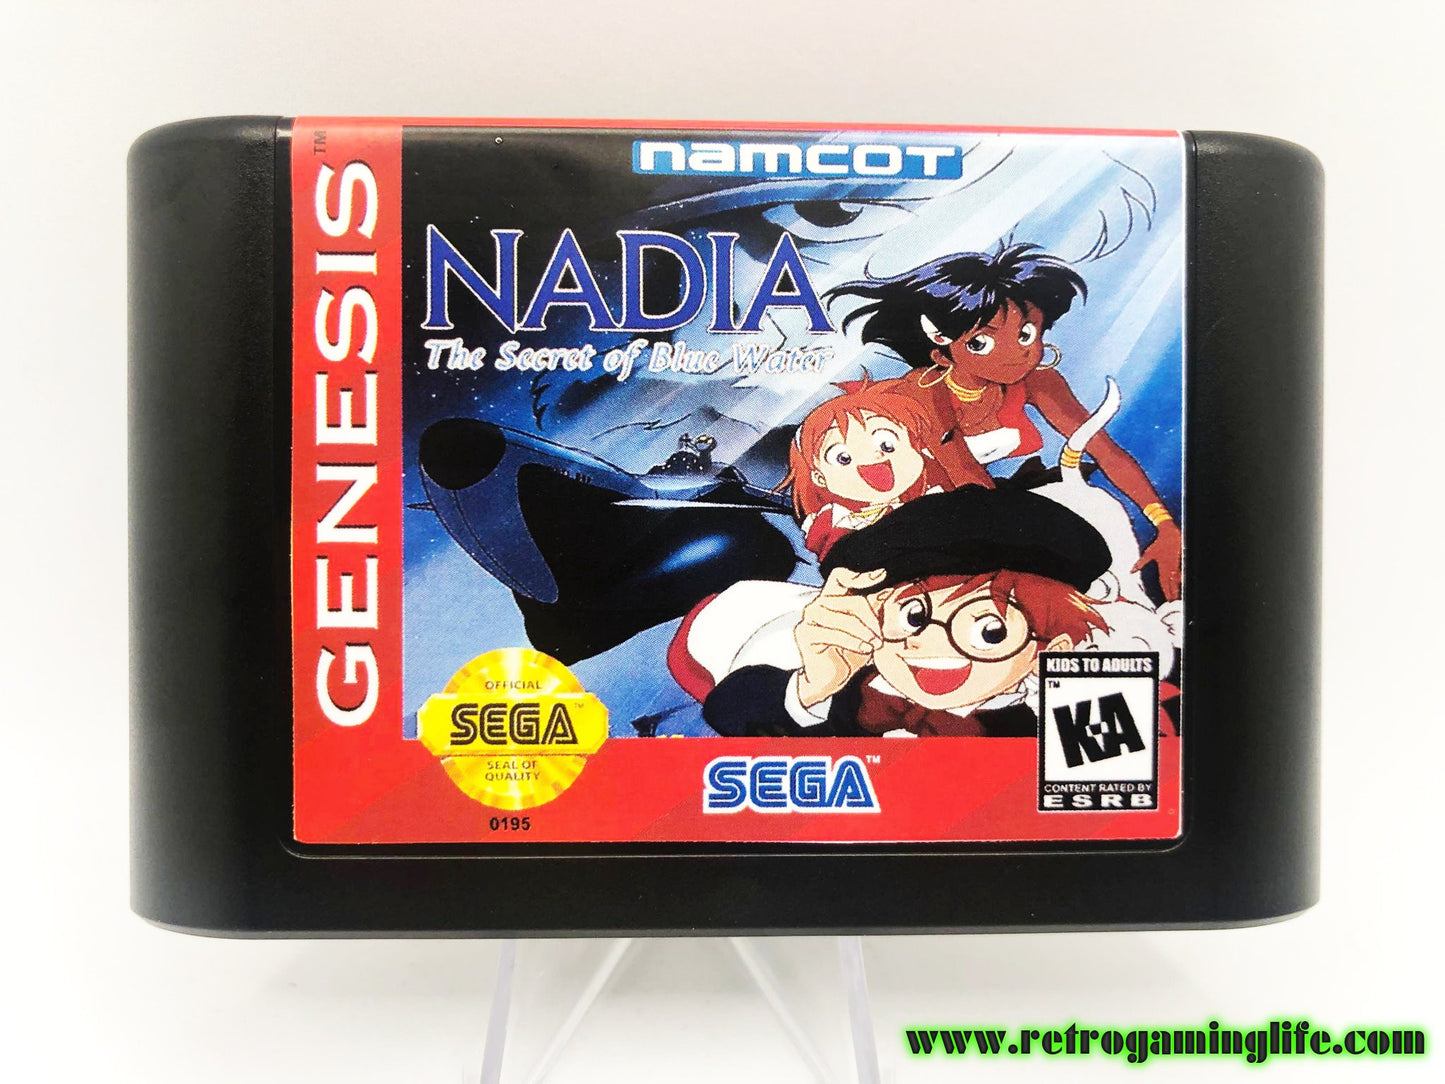 Nadia The Secret of the Blue Water Genesis Repro Game Cart English